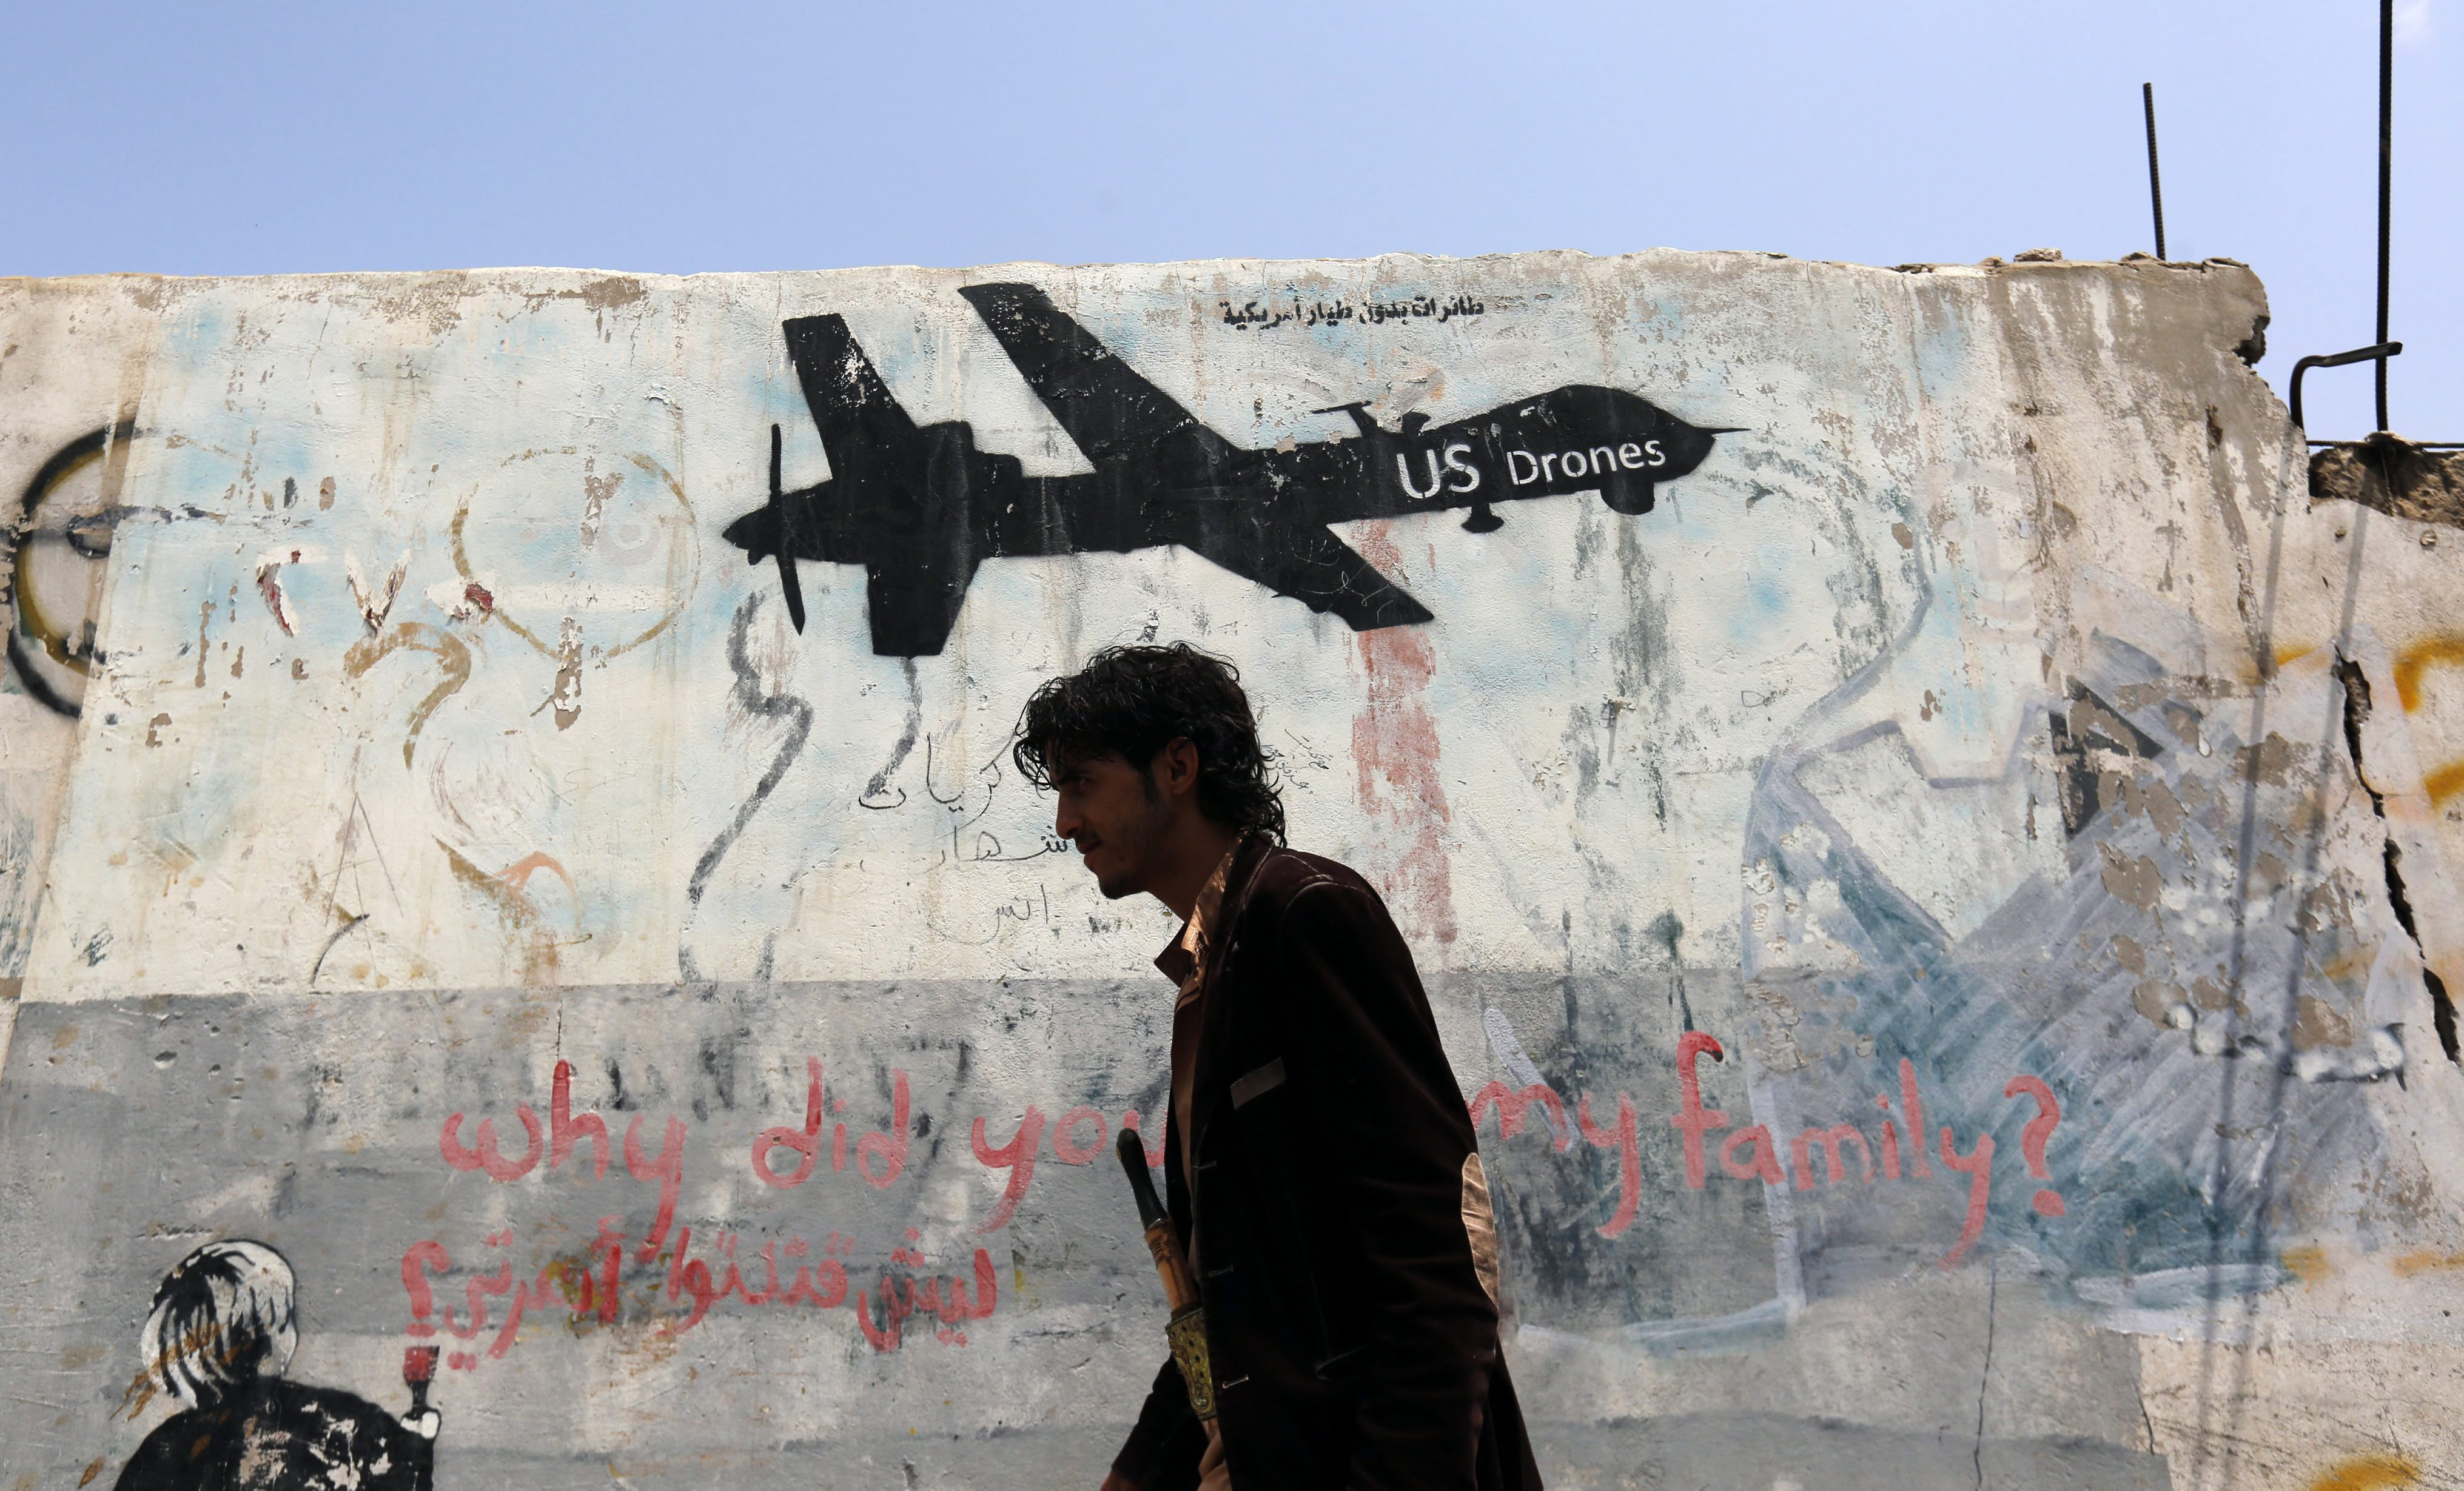 A Yemeni walks past graffiti protesting US drone operations in Yemen, few hours after a US drone attack on suspected al-Qaeda militants